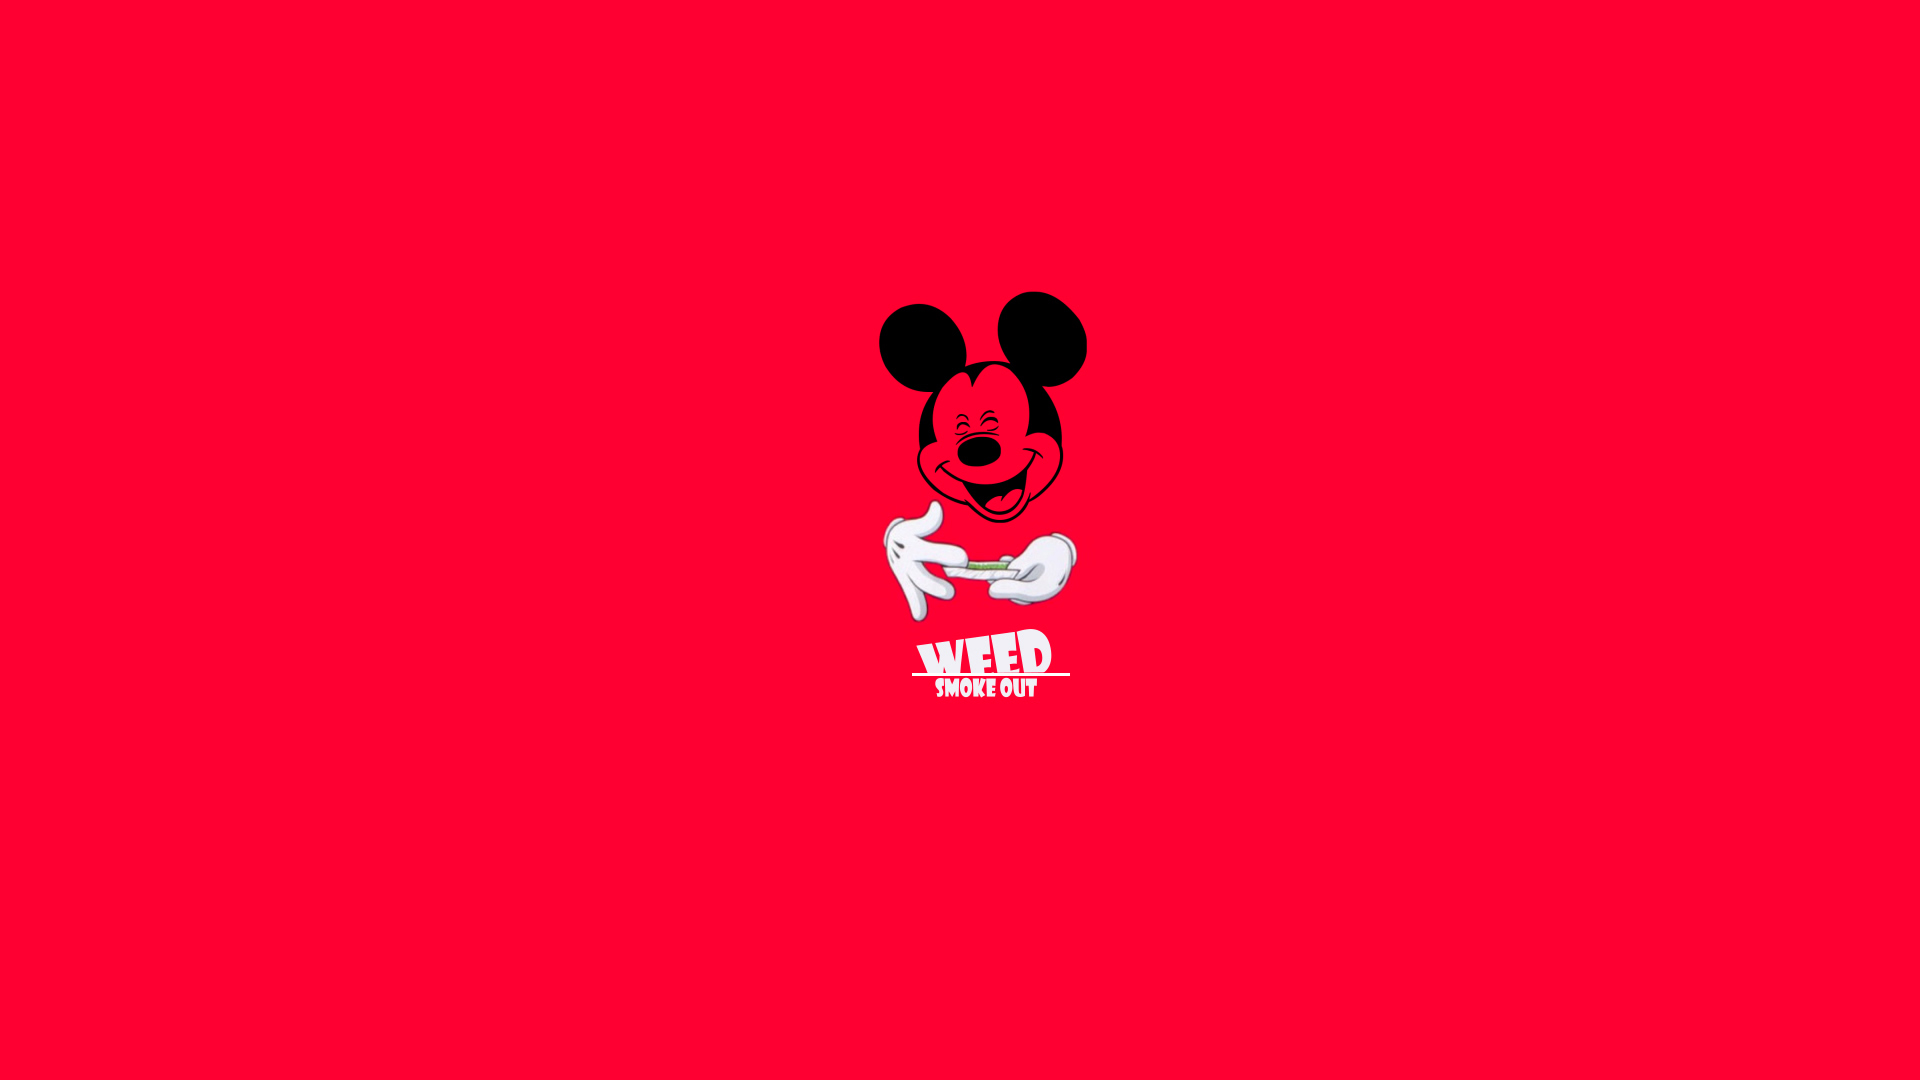 Download wallpaper Smoke, Mickey Mouse, Swag, Kanabis, Weed, section  minimalism in resolution 1920x1080